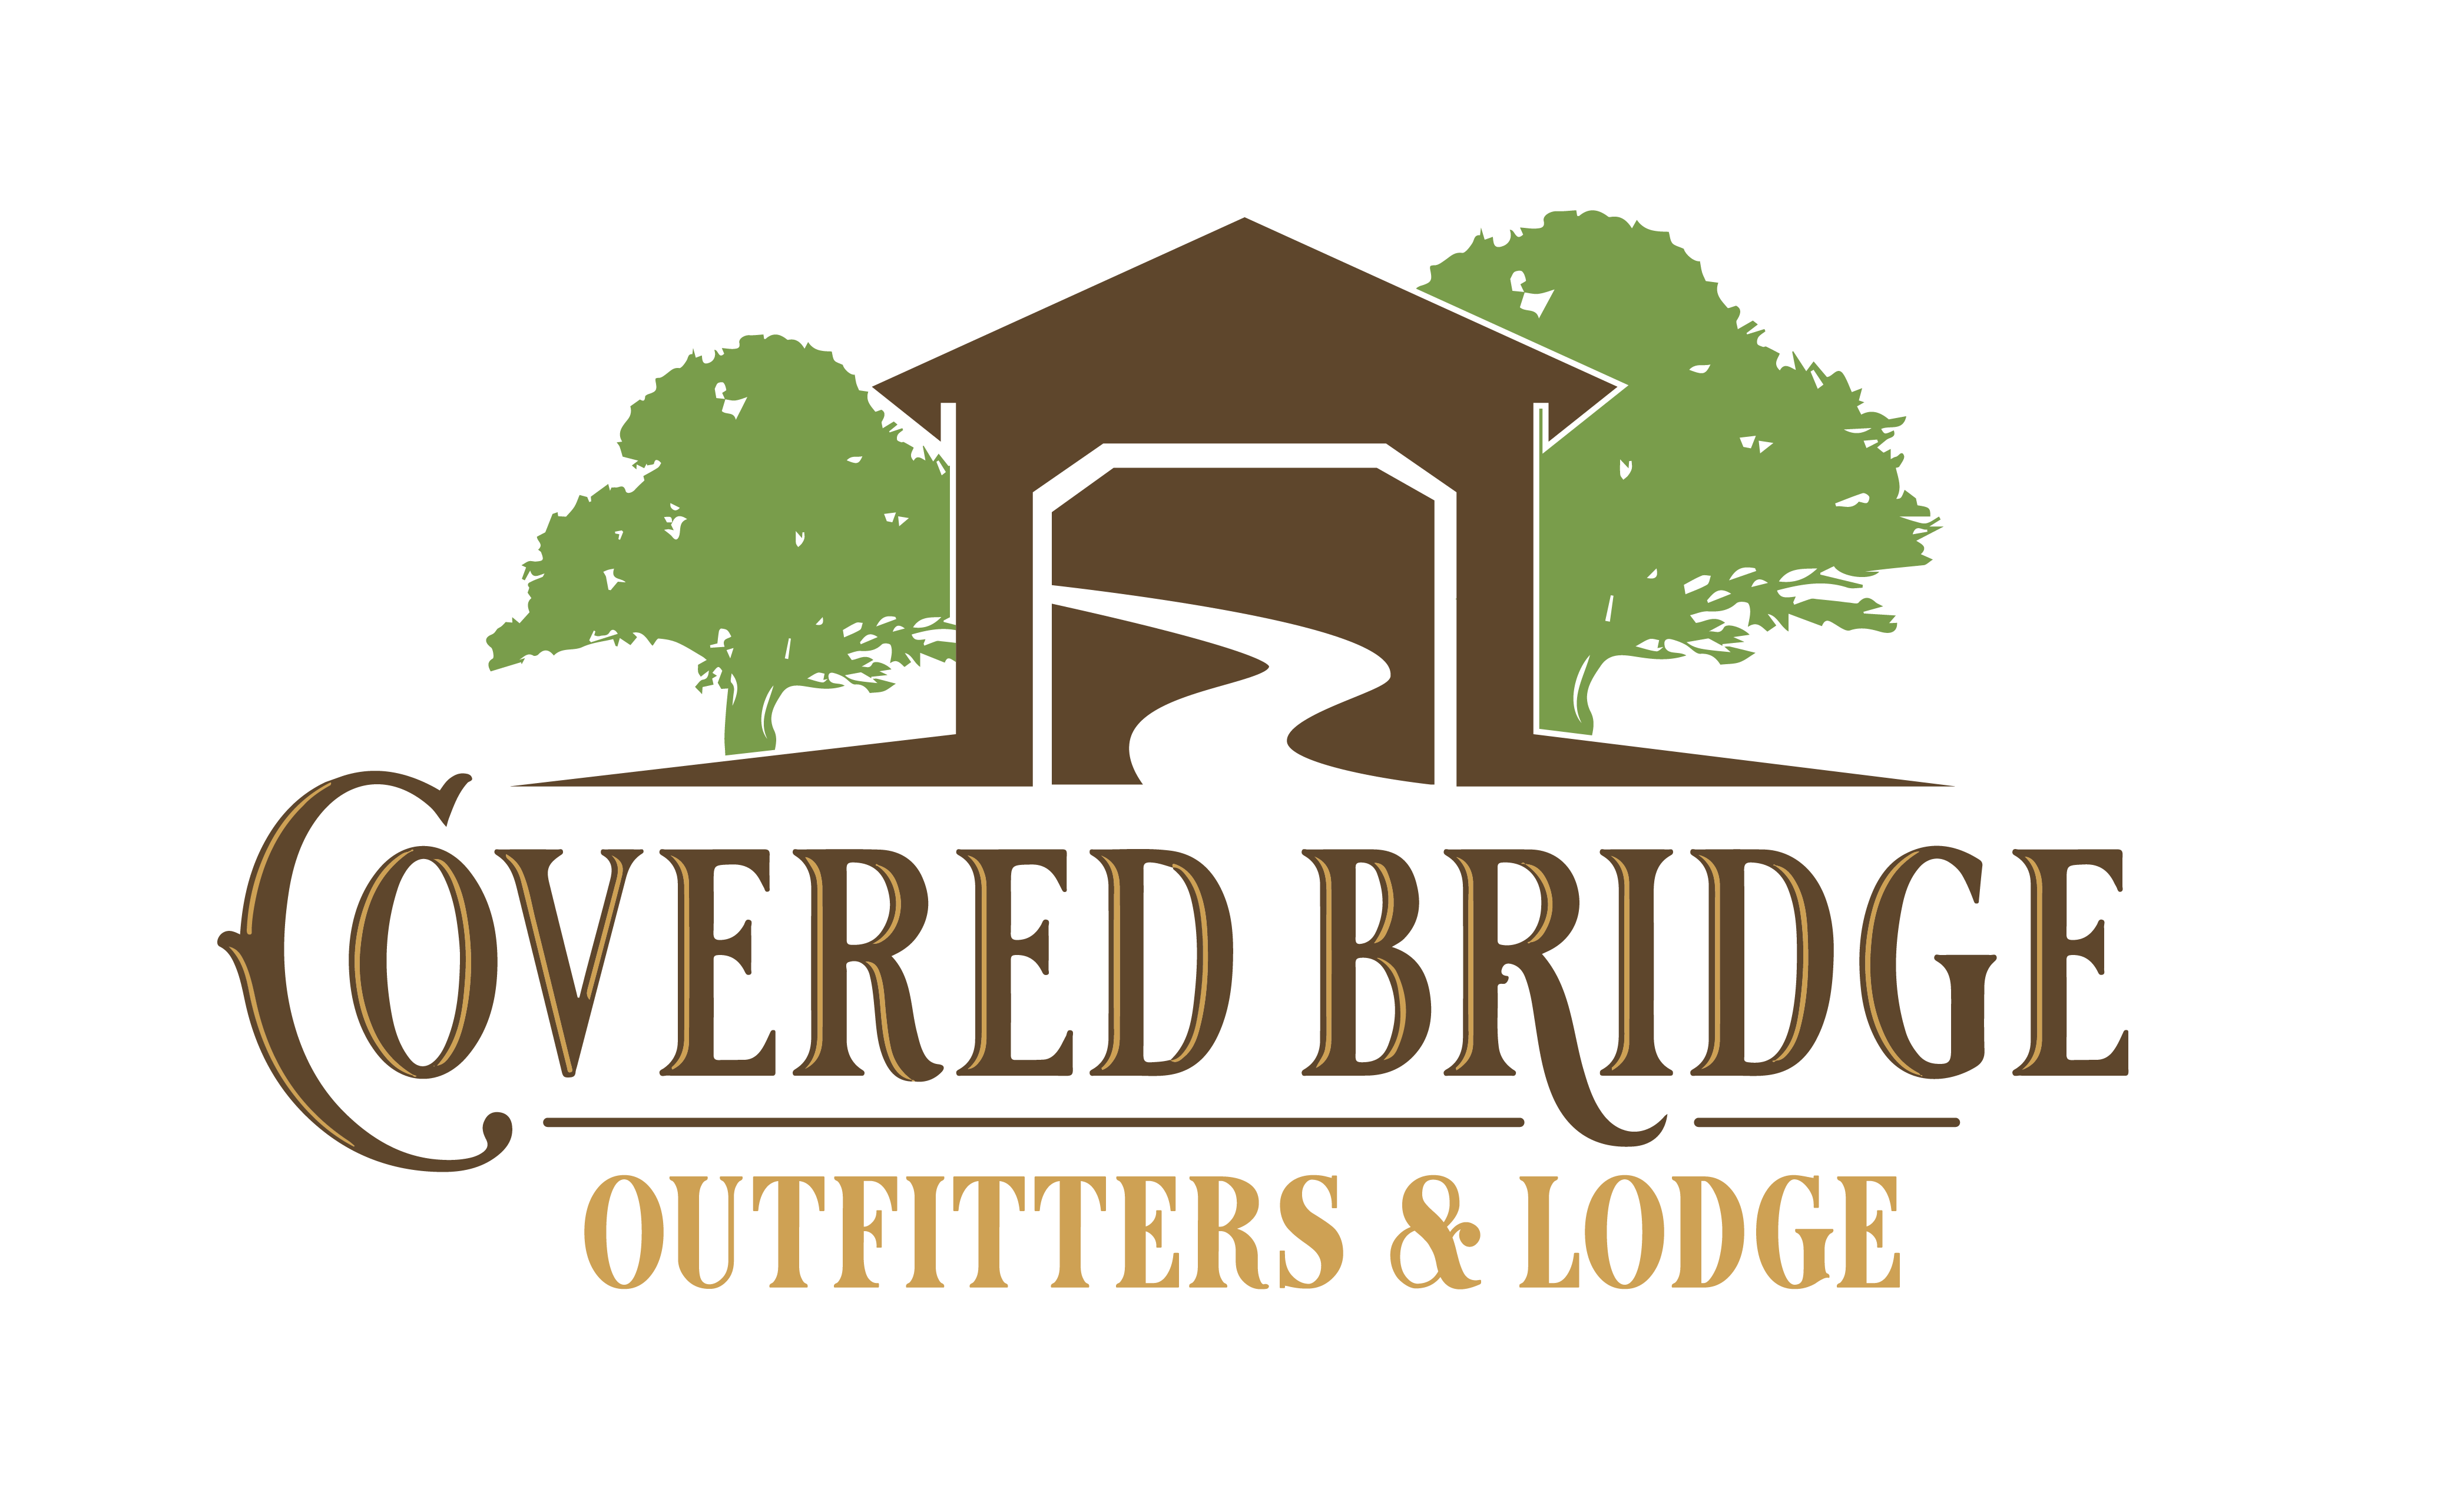 Covered Bridge Outfitters and Lodge, LLC.